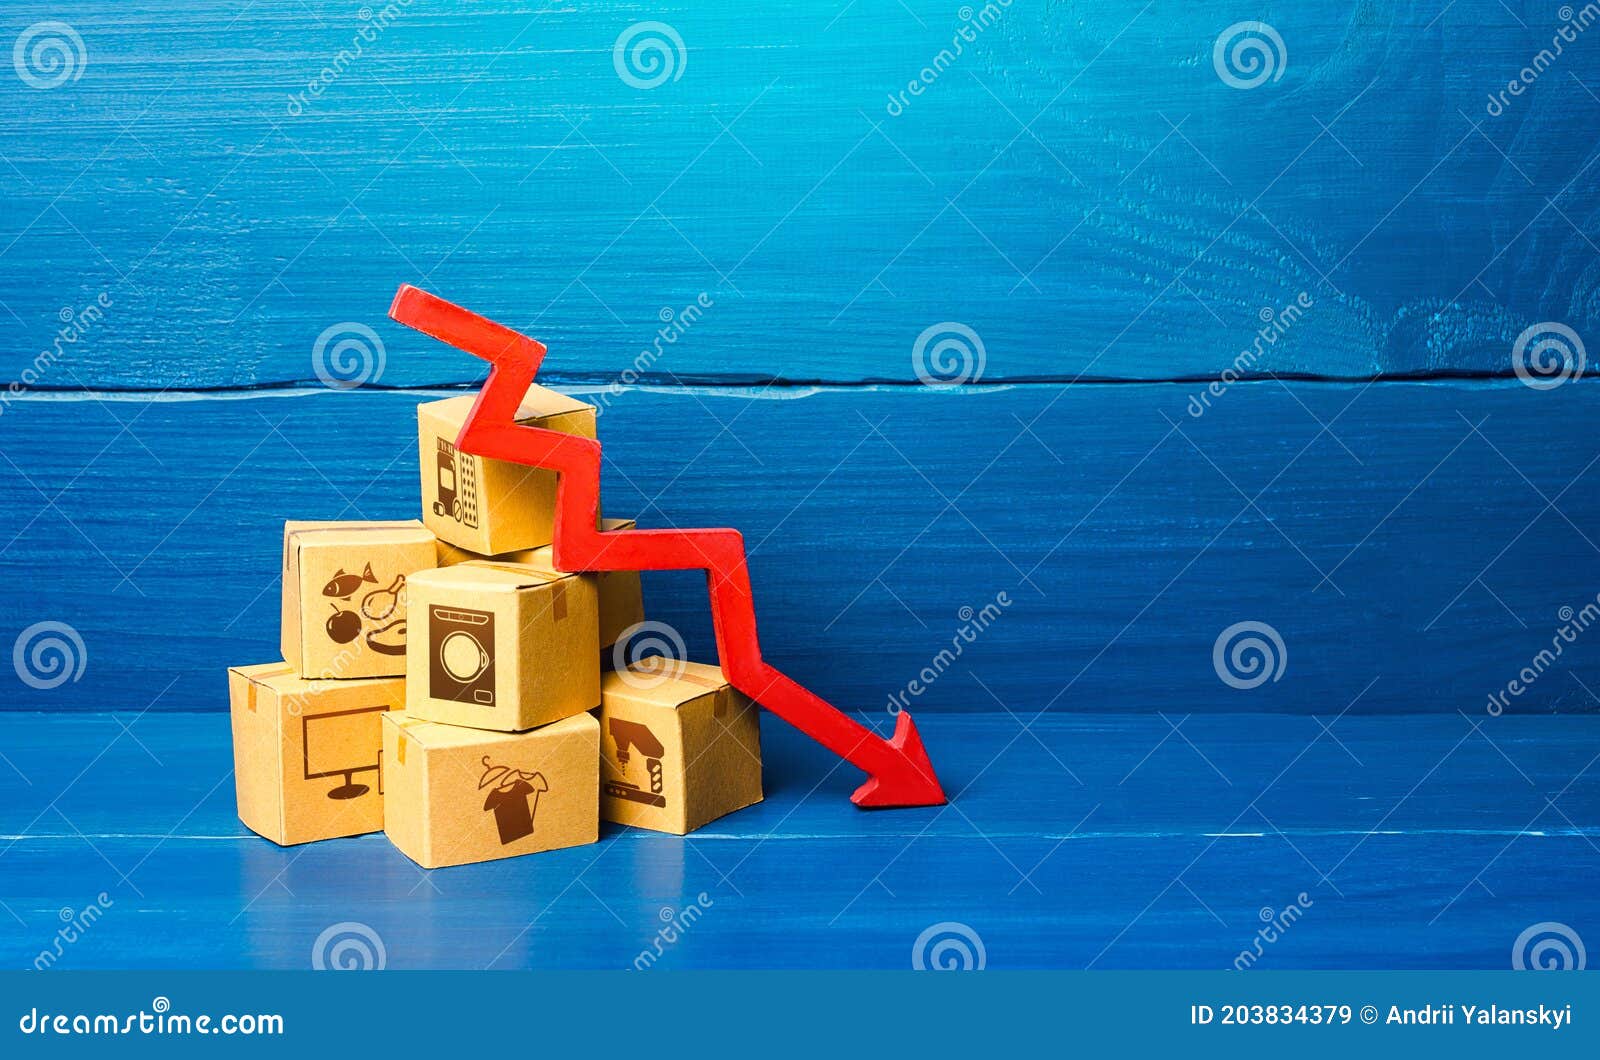 cardboard boxes and red down arrow. decline in sales and production volumes. depressed economy. low business activity